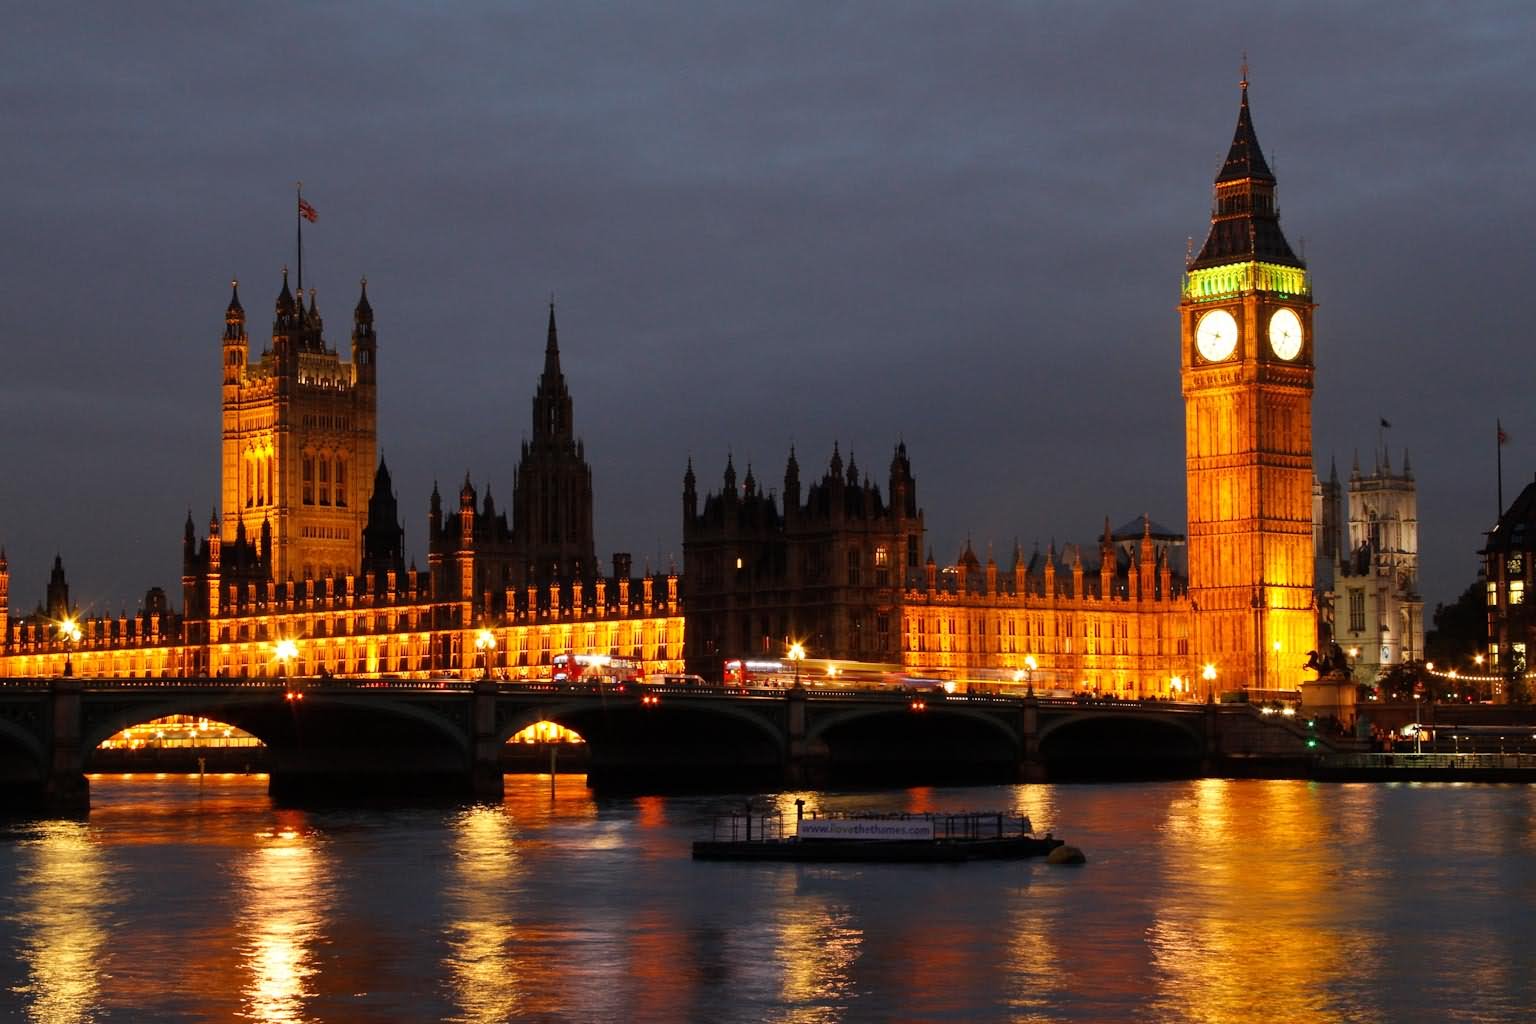 Big Ben And The Houses Of Parliament Illuminated At Night